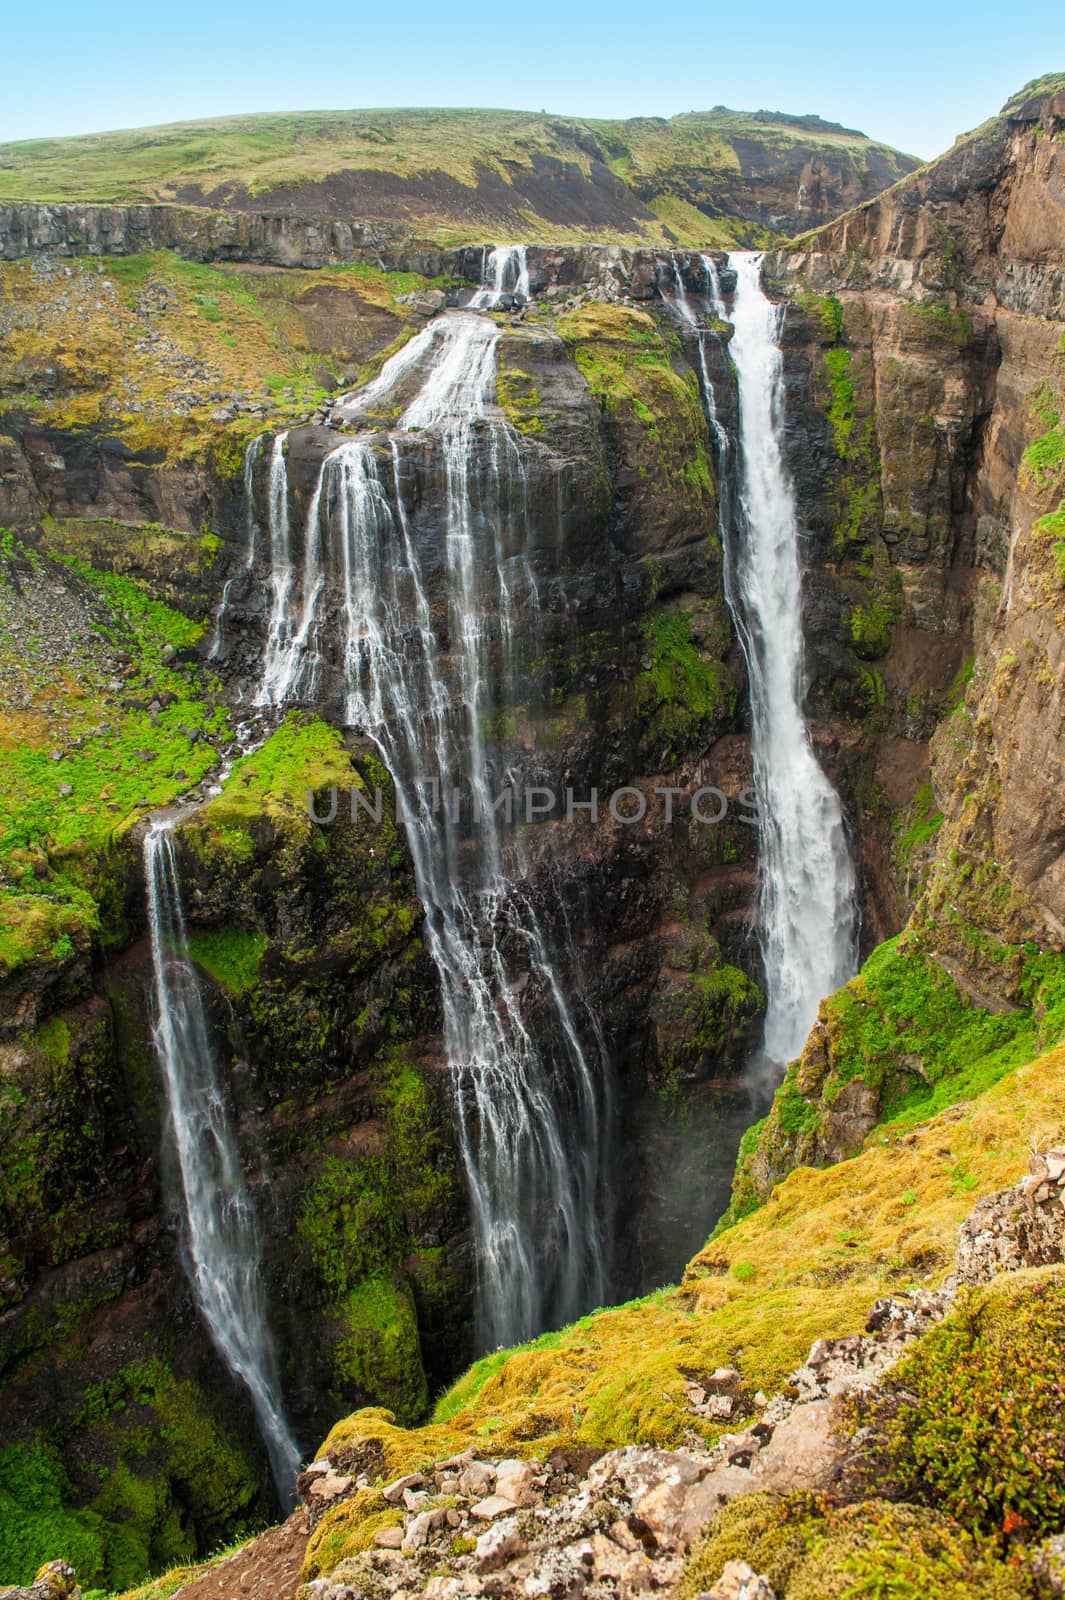 Glymur is the highest of the Icelandic waterfalls. It is located on the west of the island.